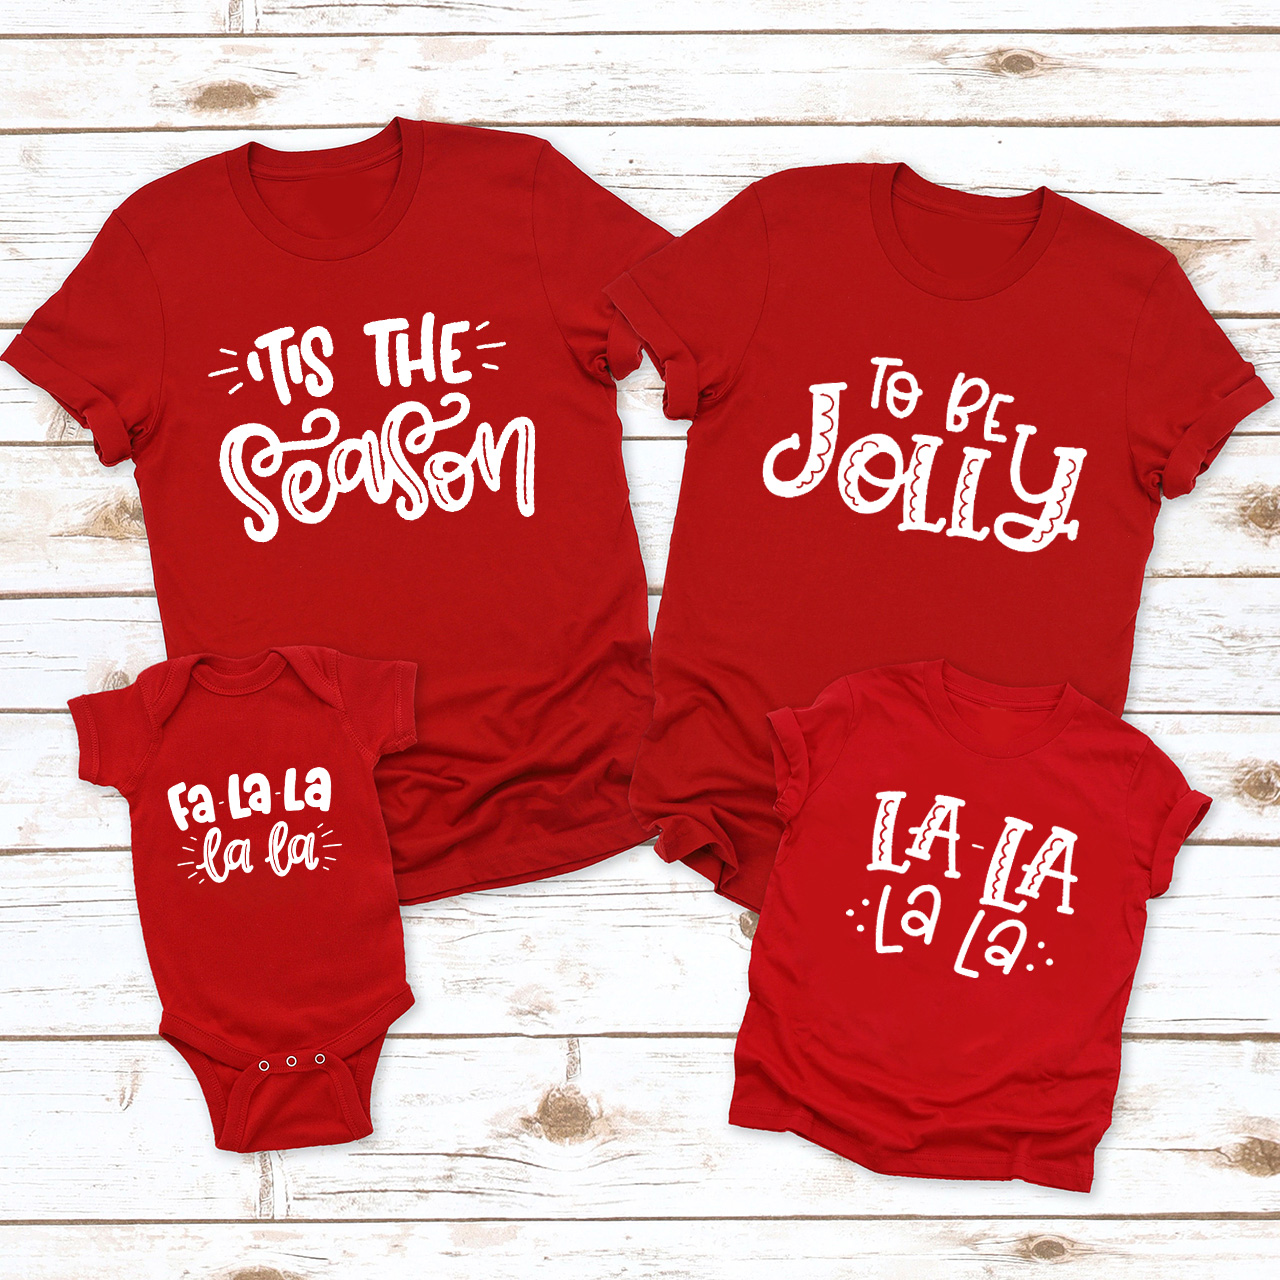 To Be Jolly Christmas Shirts For Family Members